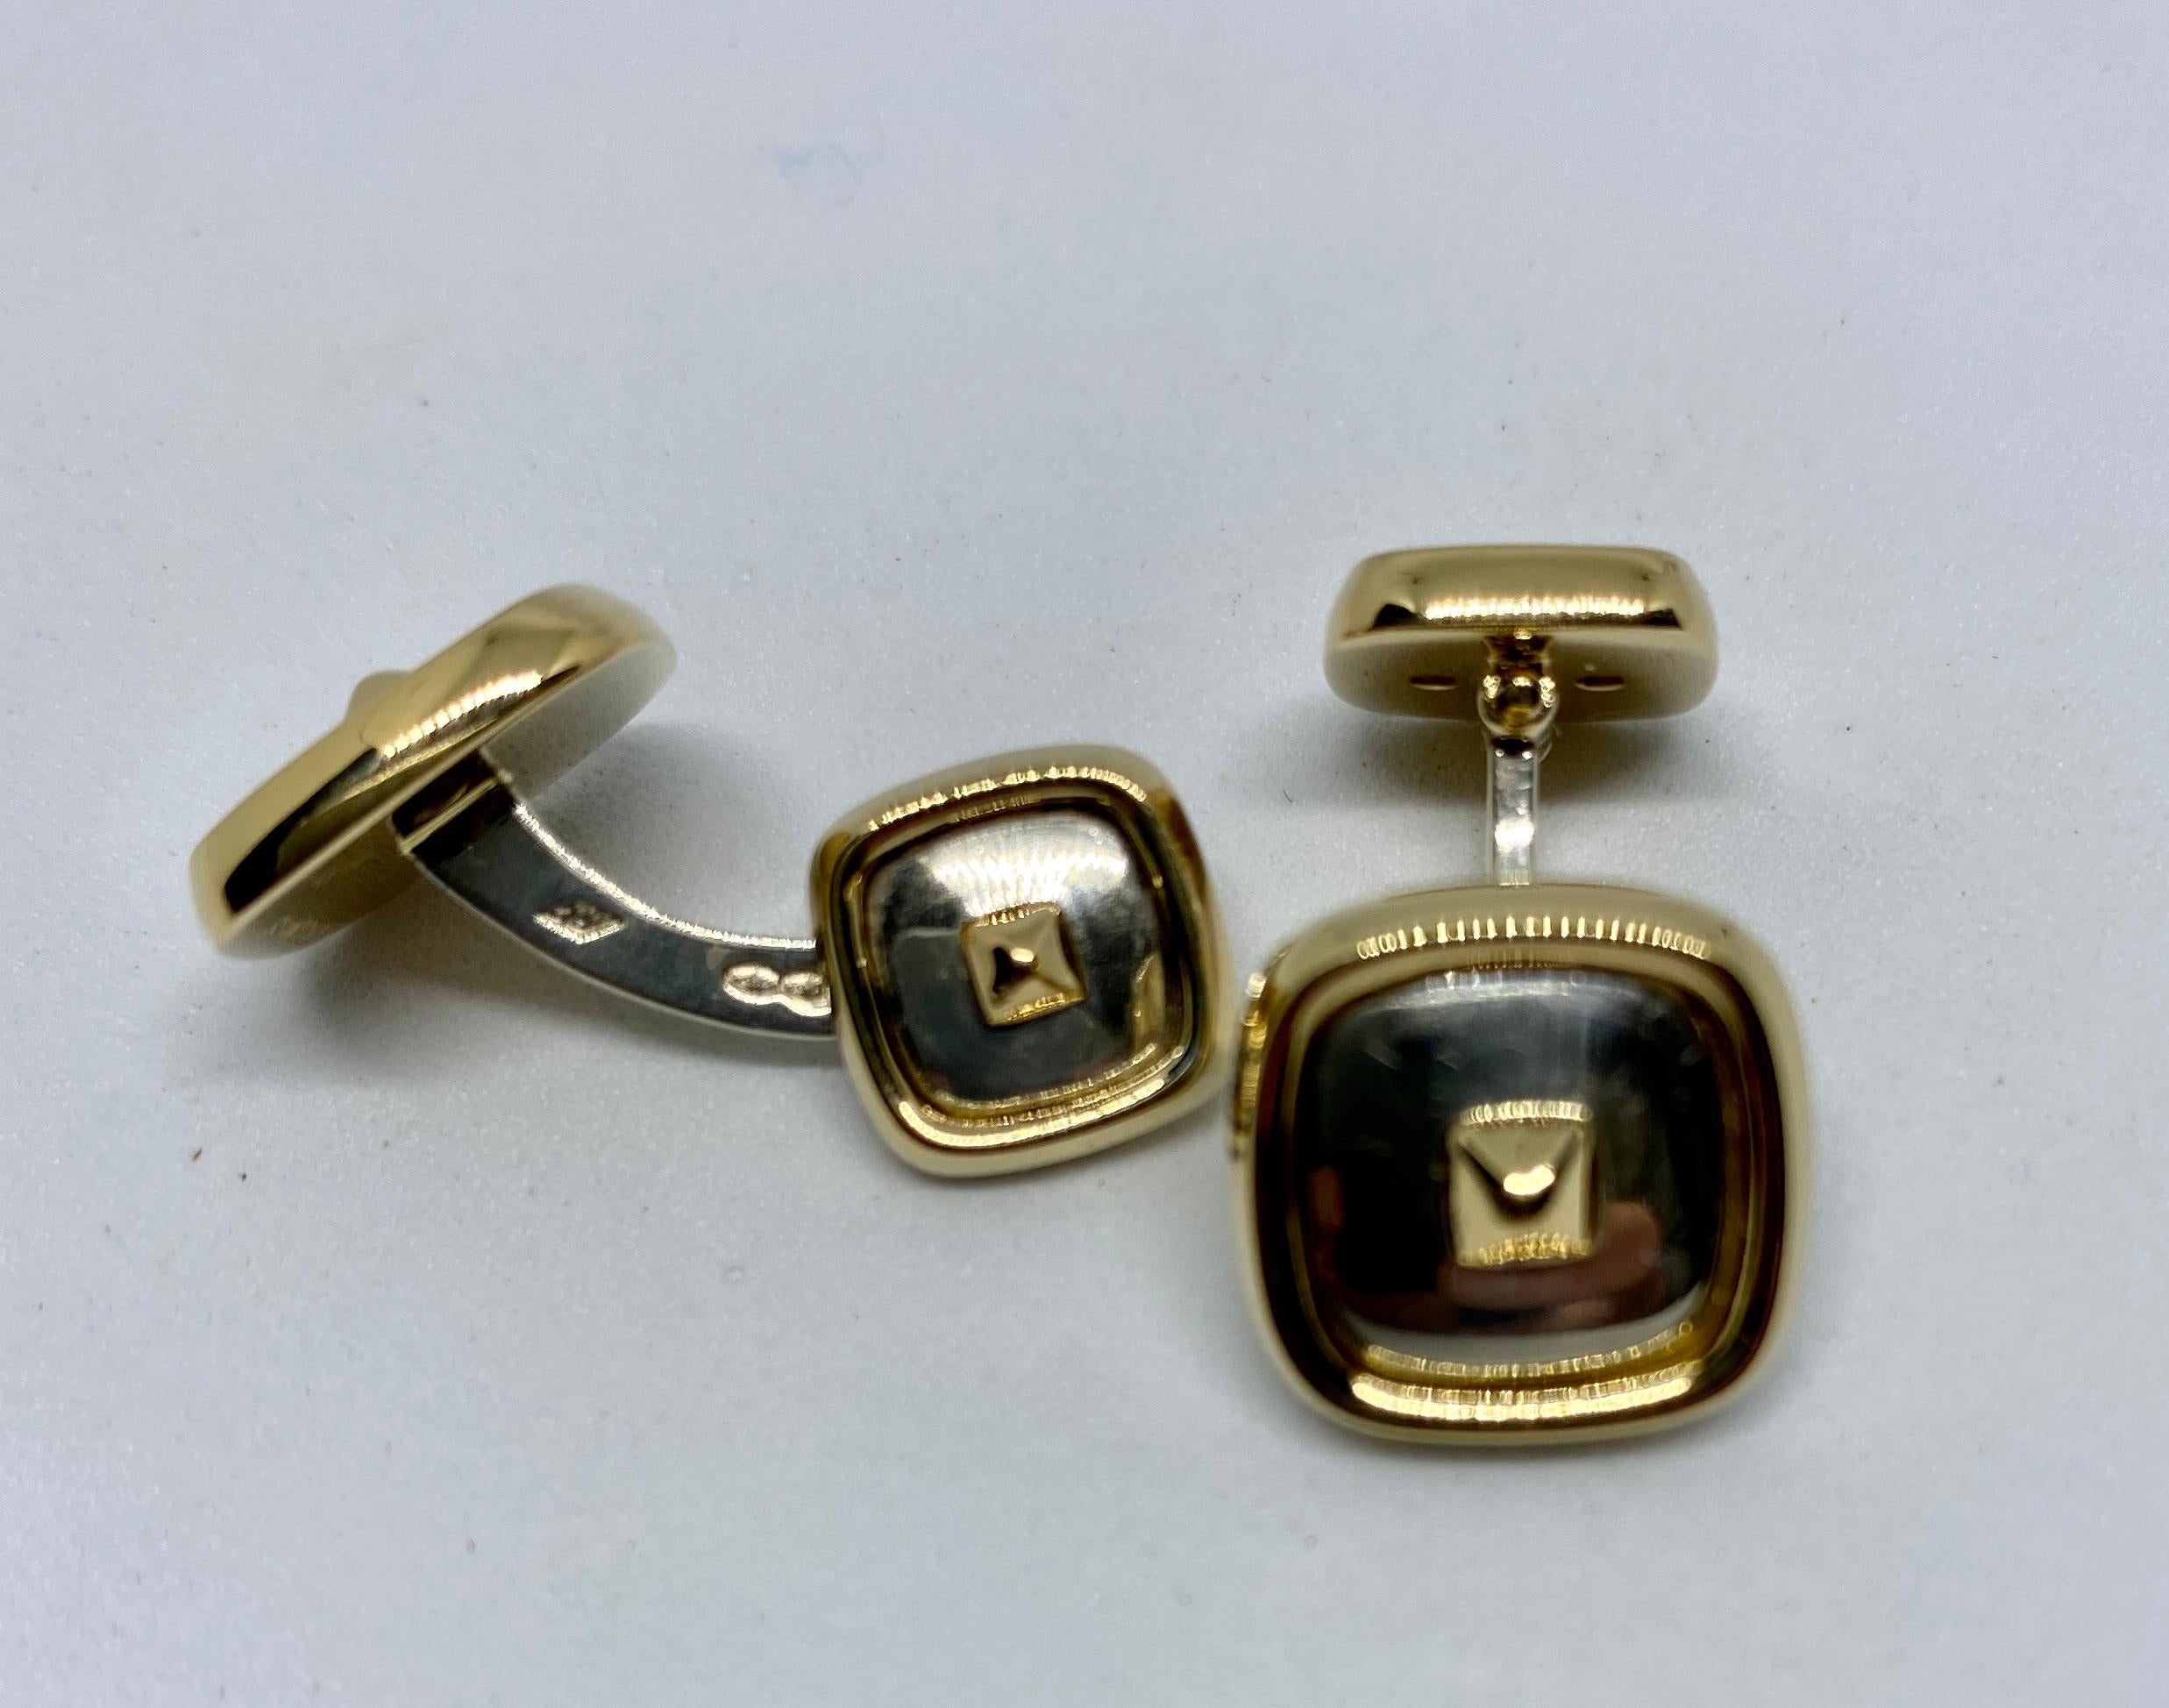 Classic, beautifully made cufflinks in sterling silver and yellow gold by Hermès Paris. A contemporary design featuring the Médor motif created by the House of Hermès in 1927, these cufflinks are simultaneously classic and modern, casual and